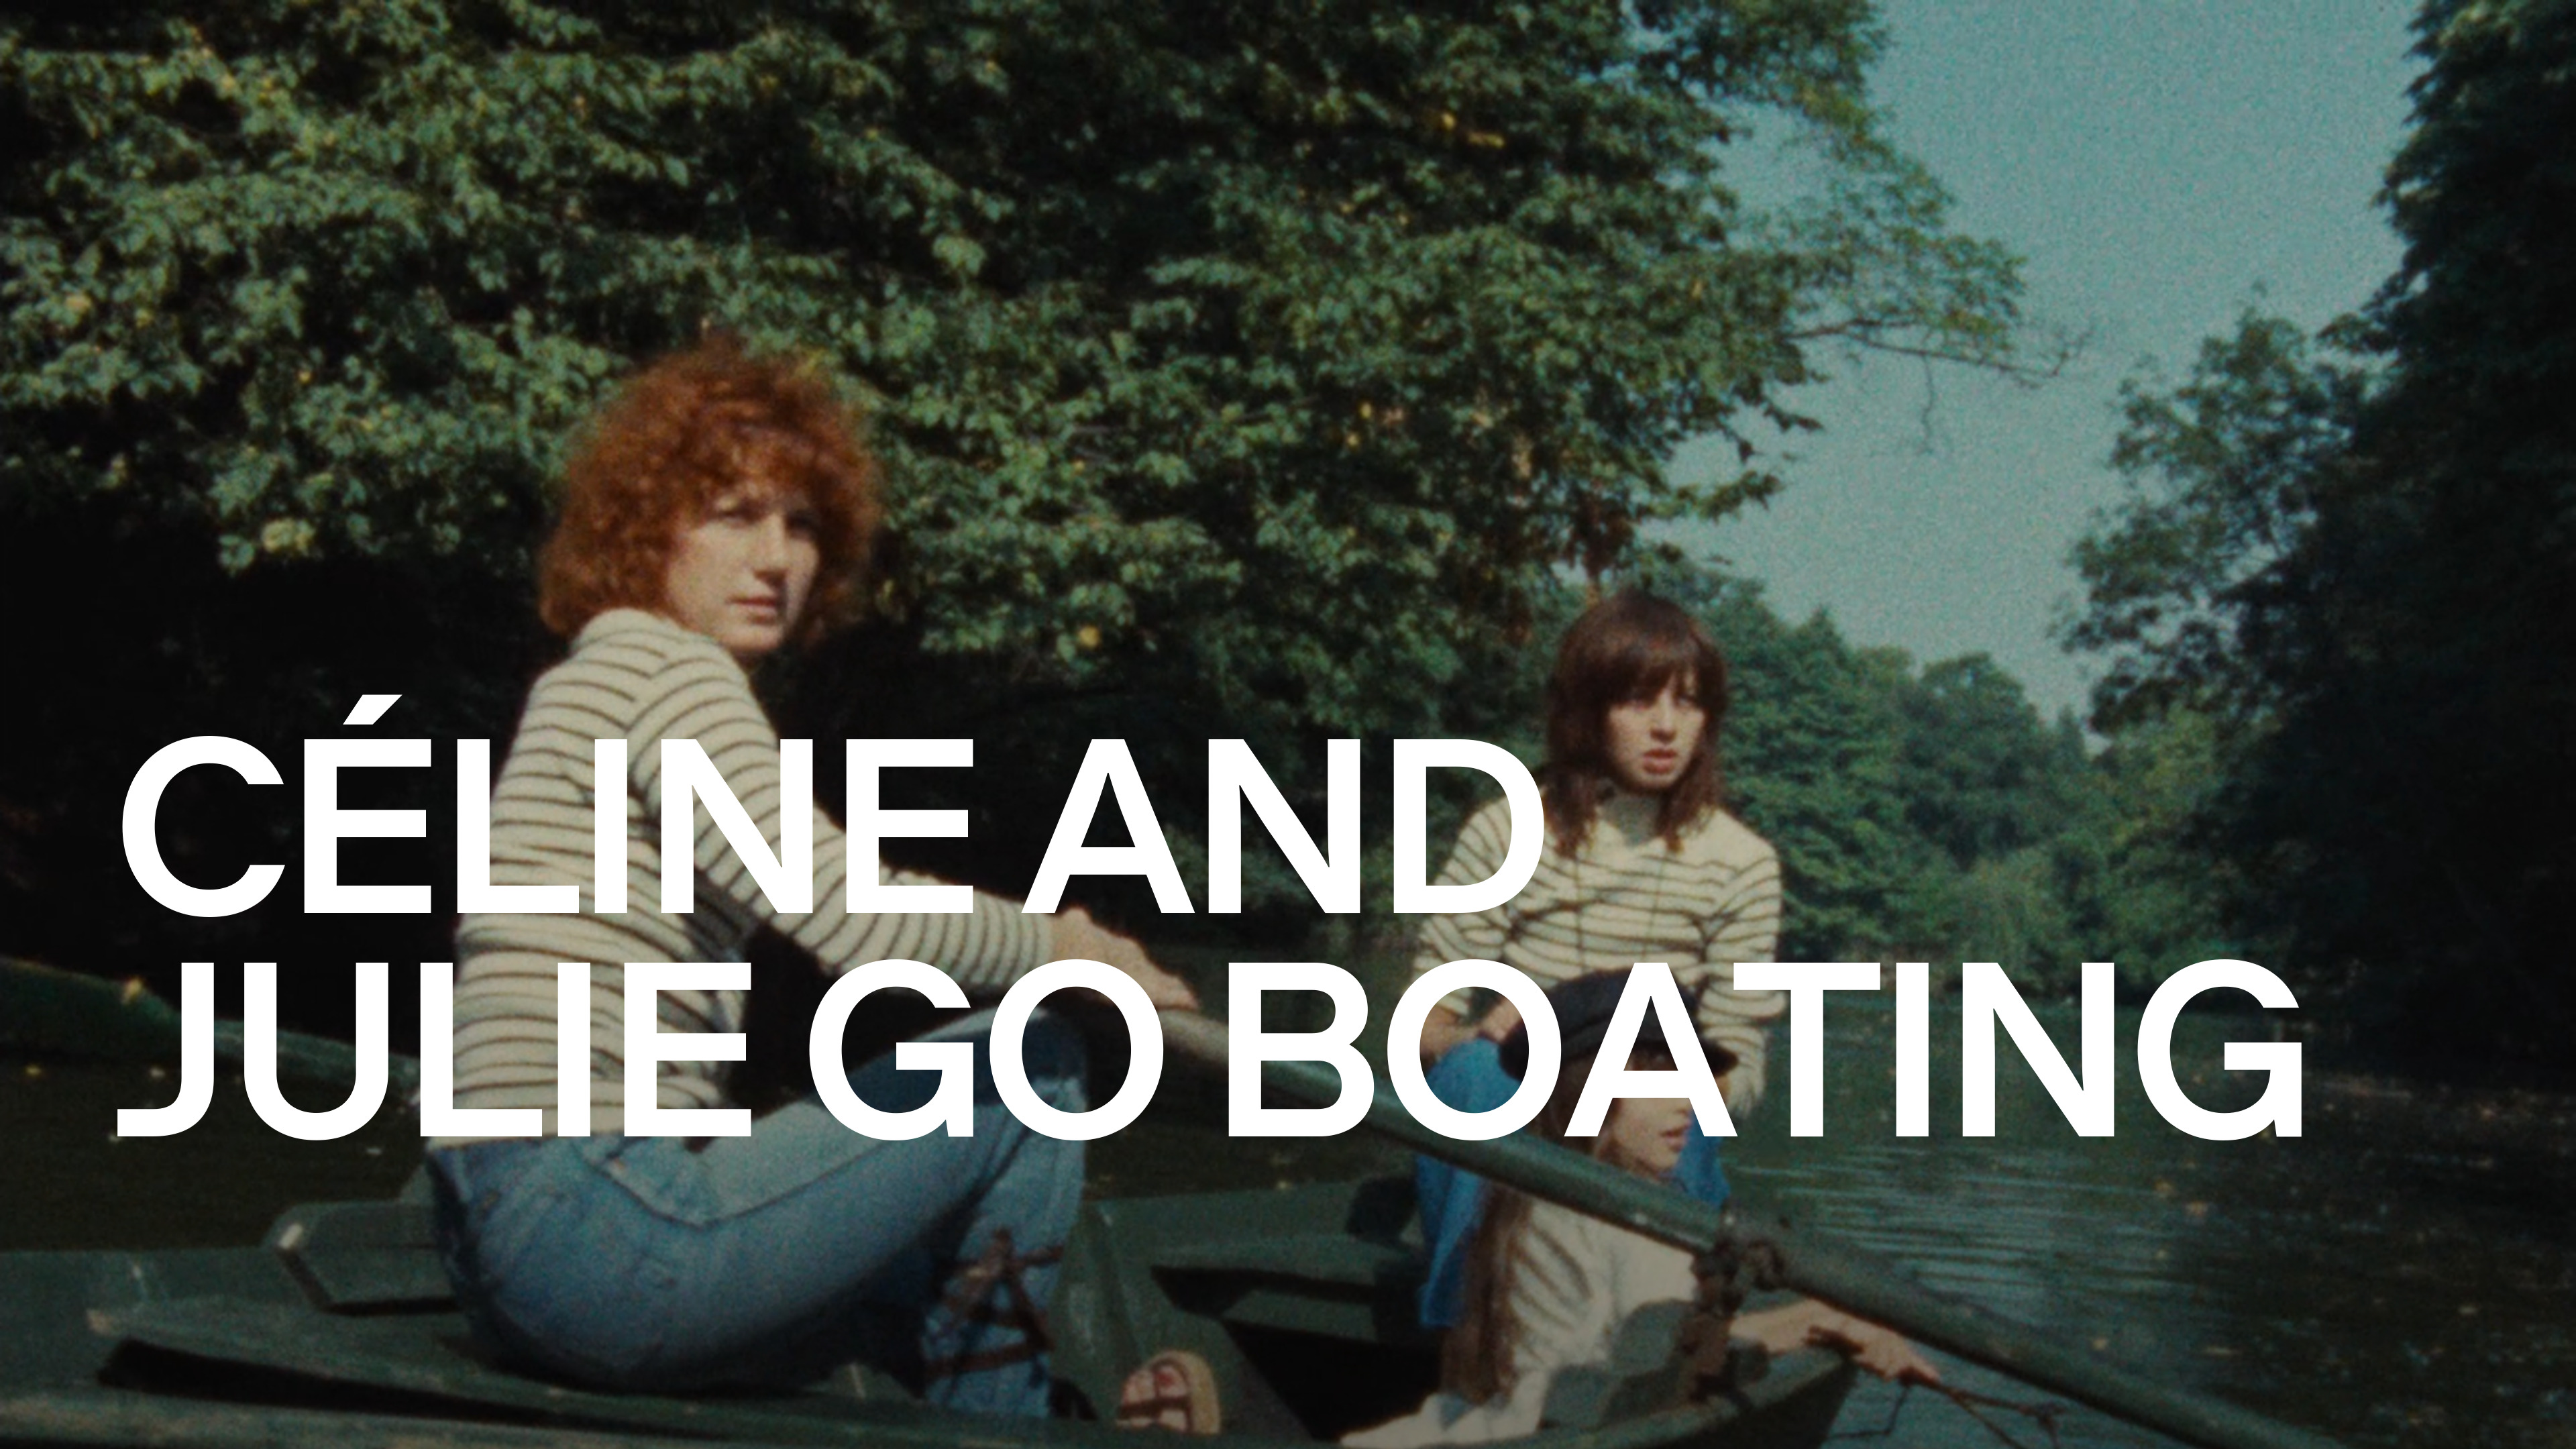 32-facts-about-the-movie-celine-and-julie-go-boating